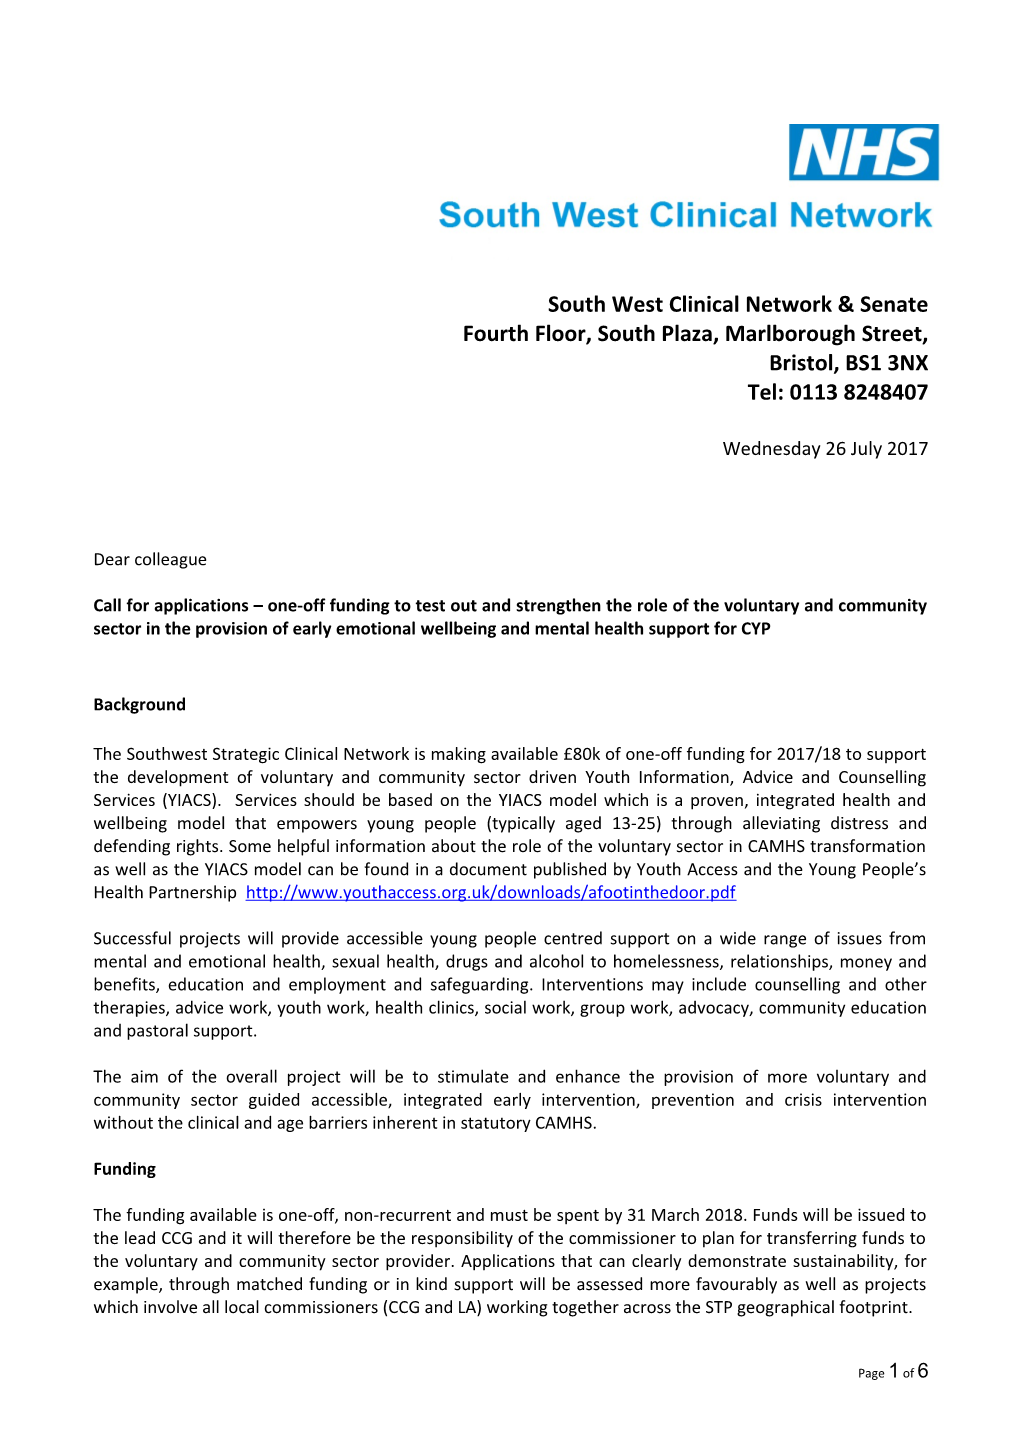 South West Clinical Network & Senate